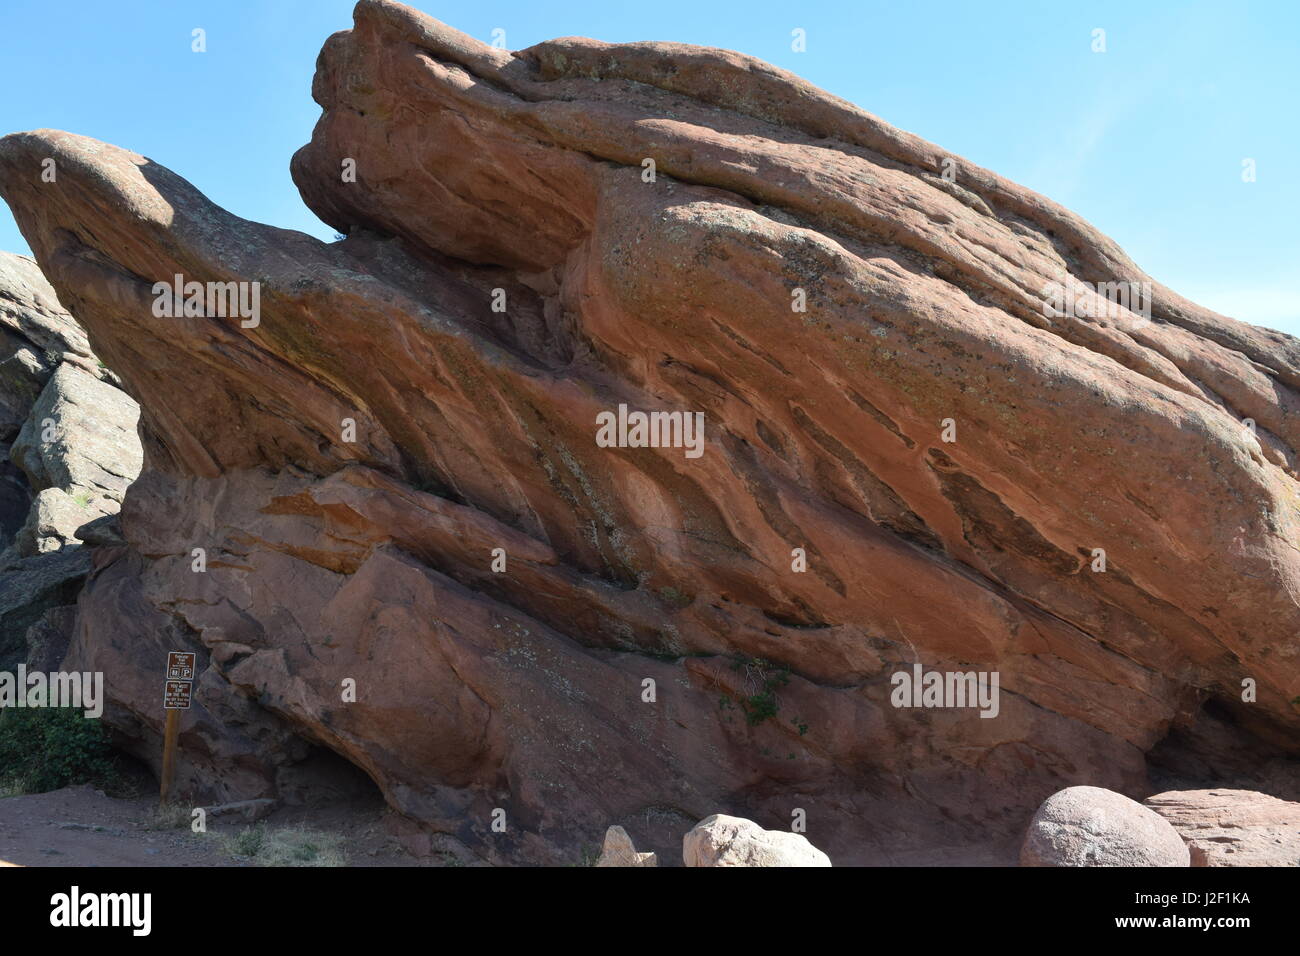 A interesting shaped rock in the Red Rocks Park in Denver Colorado. Stock Photo